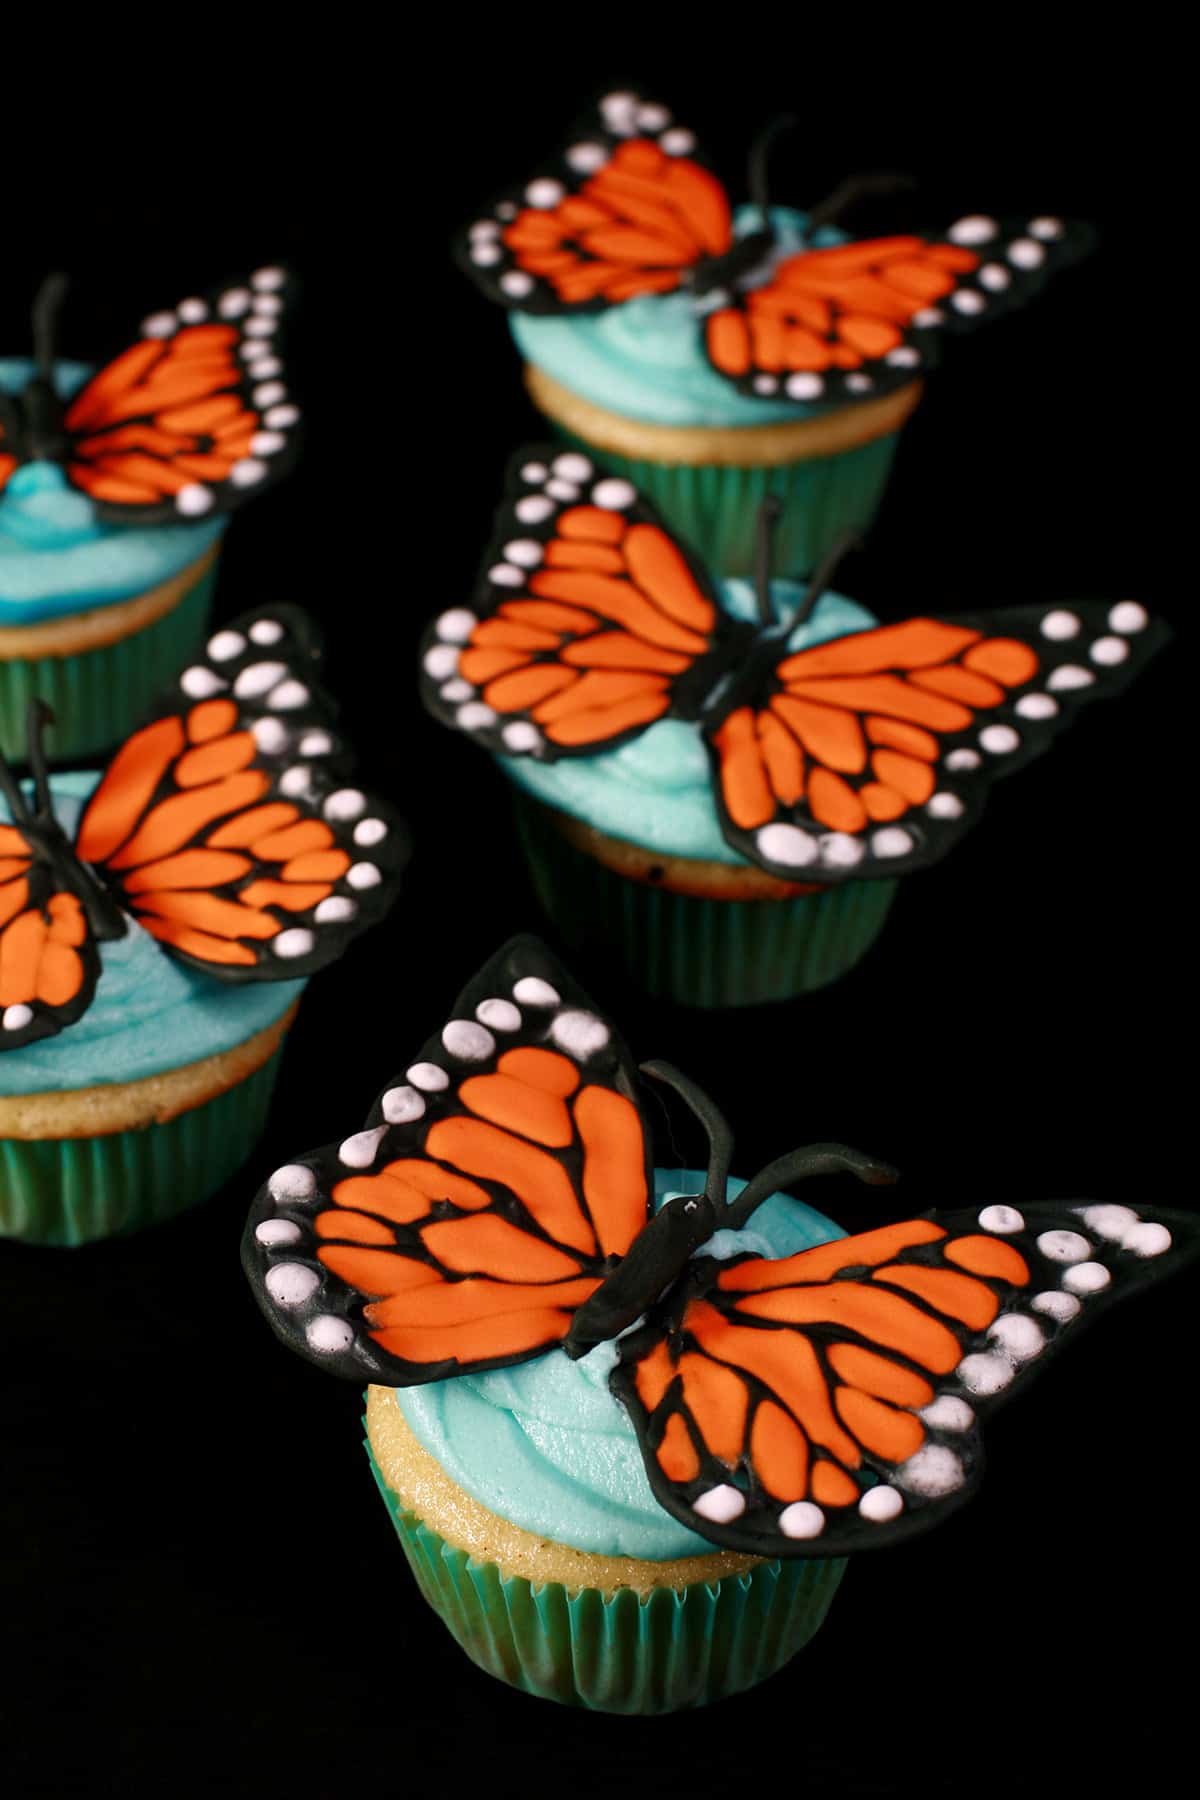 Several 3D Monarch Butterfly Cupcakes, on a black background.  Vanilla cupcakes, frosted with sky blue icing, and topped with Monarch butterfly wings made from royal icing.